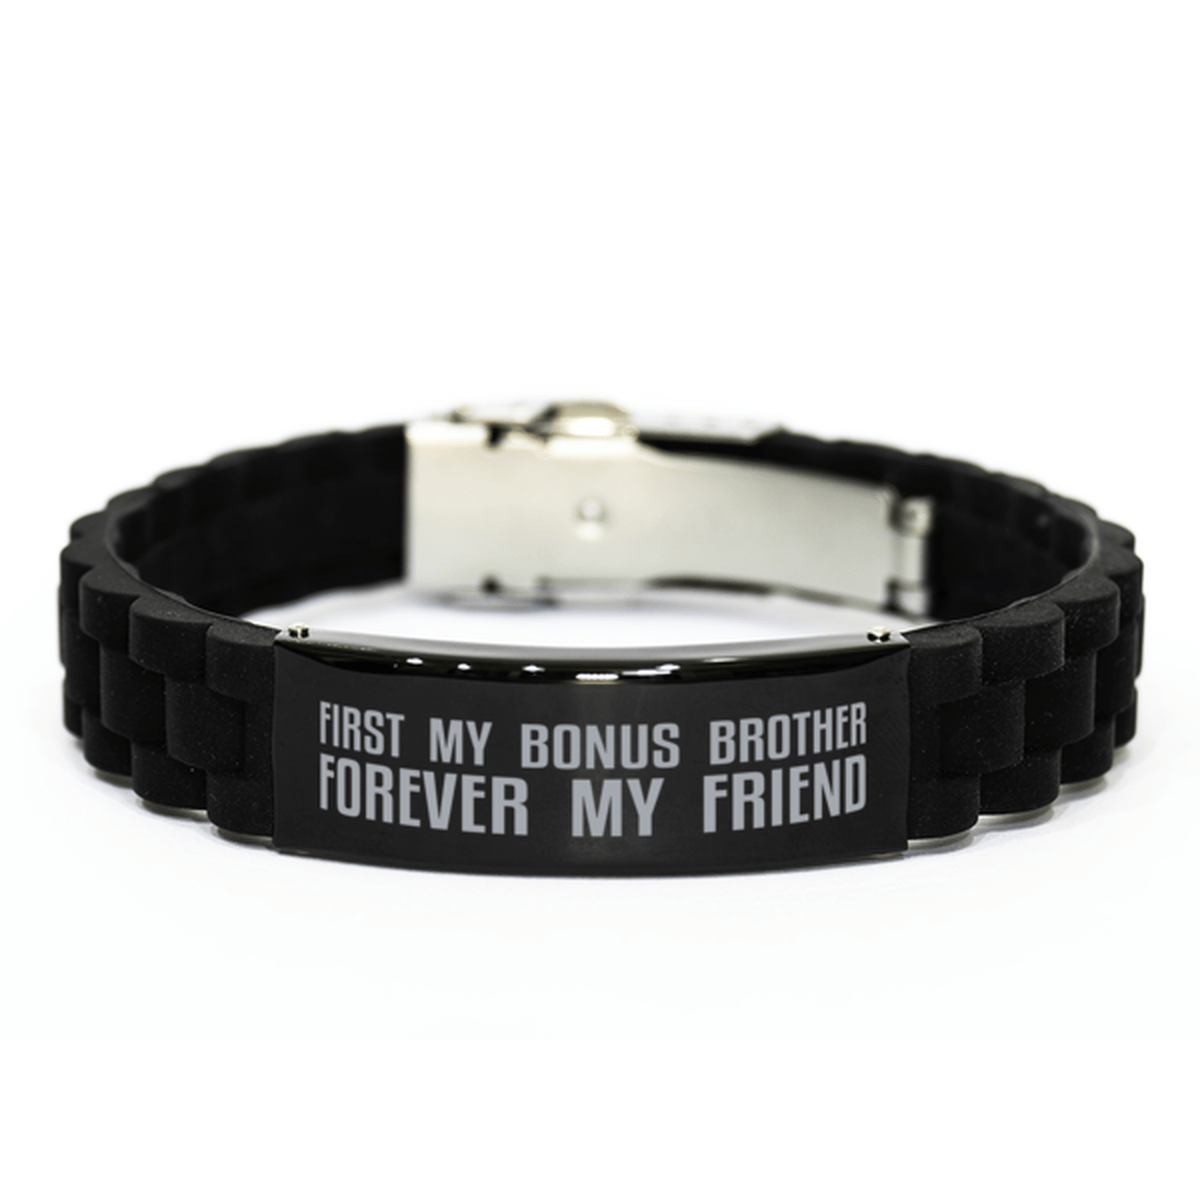 Unique Bonus Brother Bracelet, First My Bonus Brother Forever My Friend, Best Gift for Stepbrother Brother-in-Law Birthday, Christmas